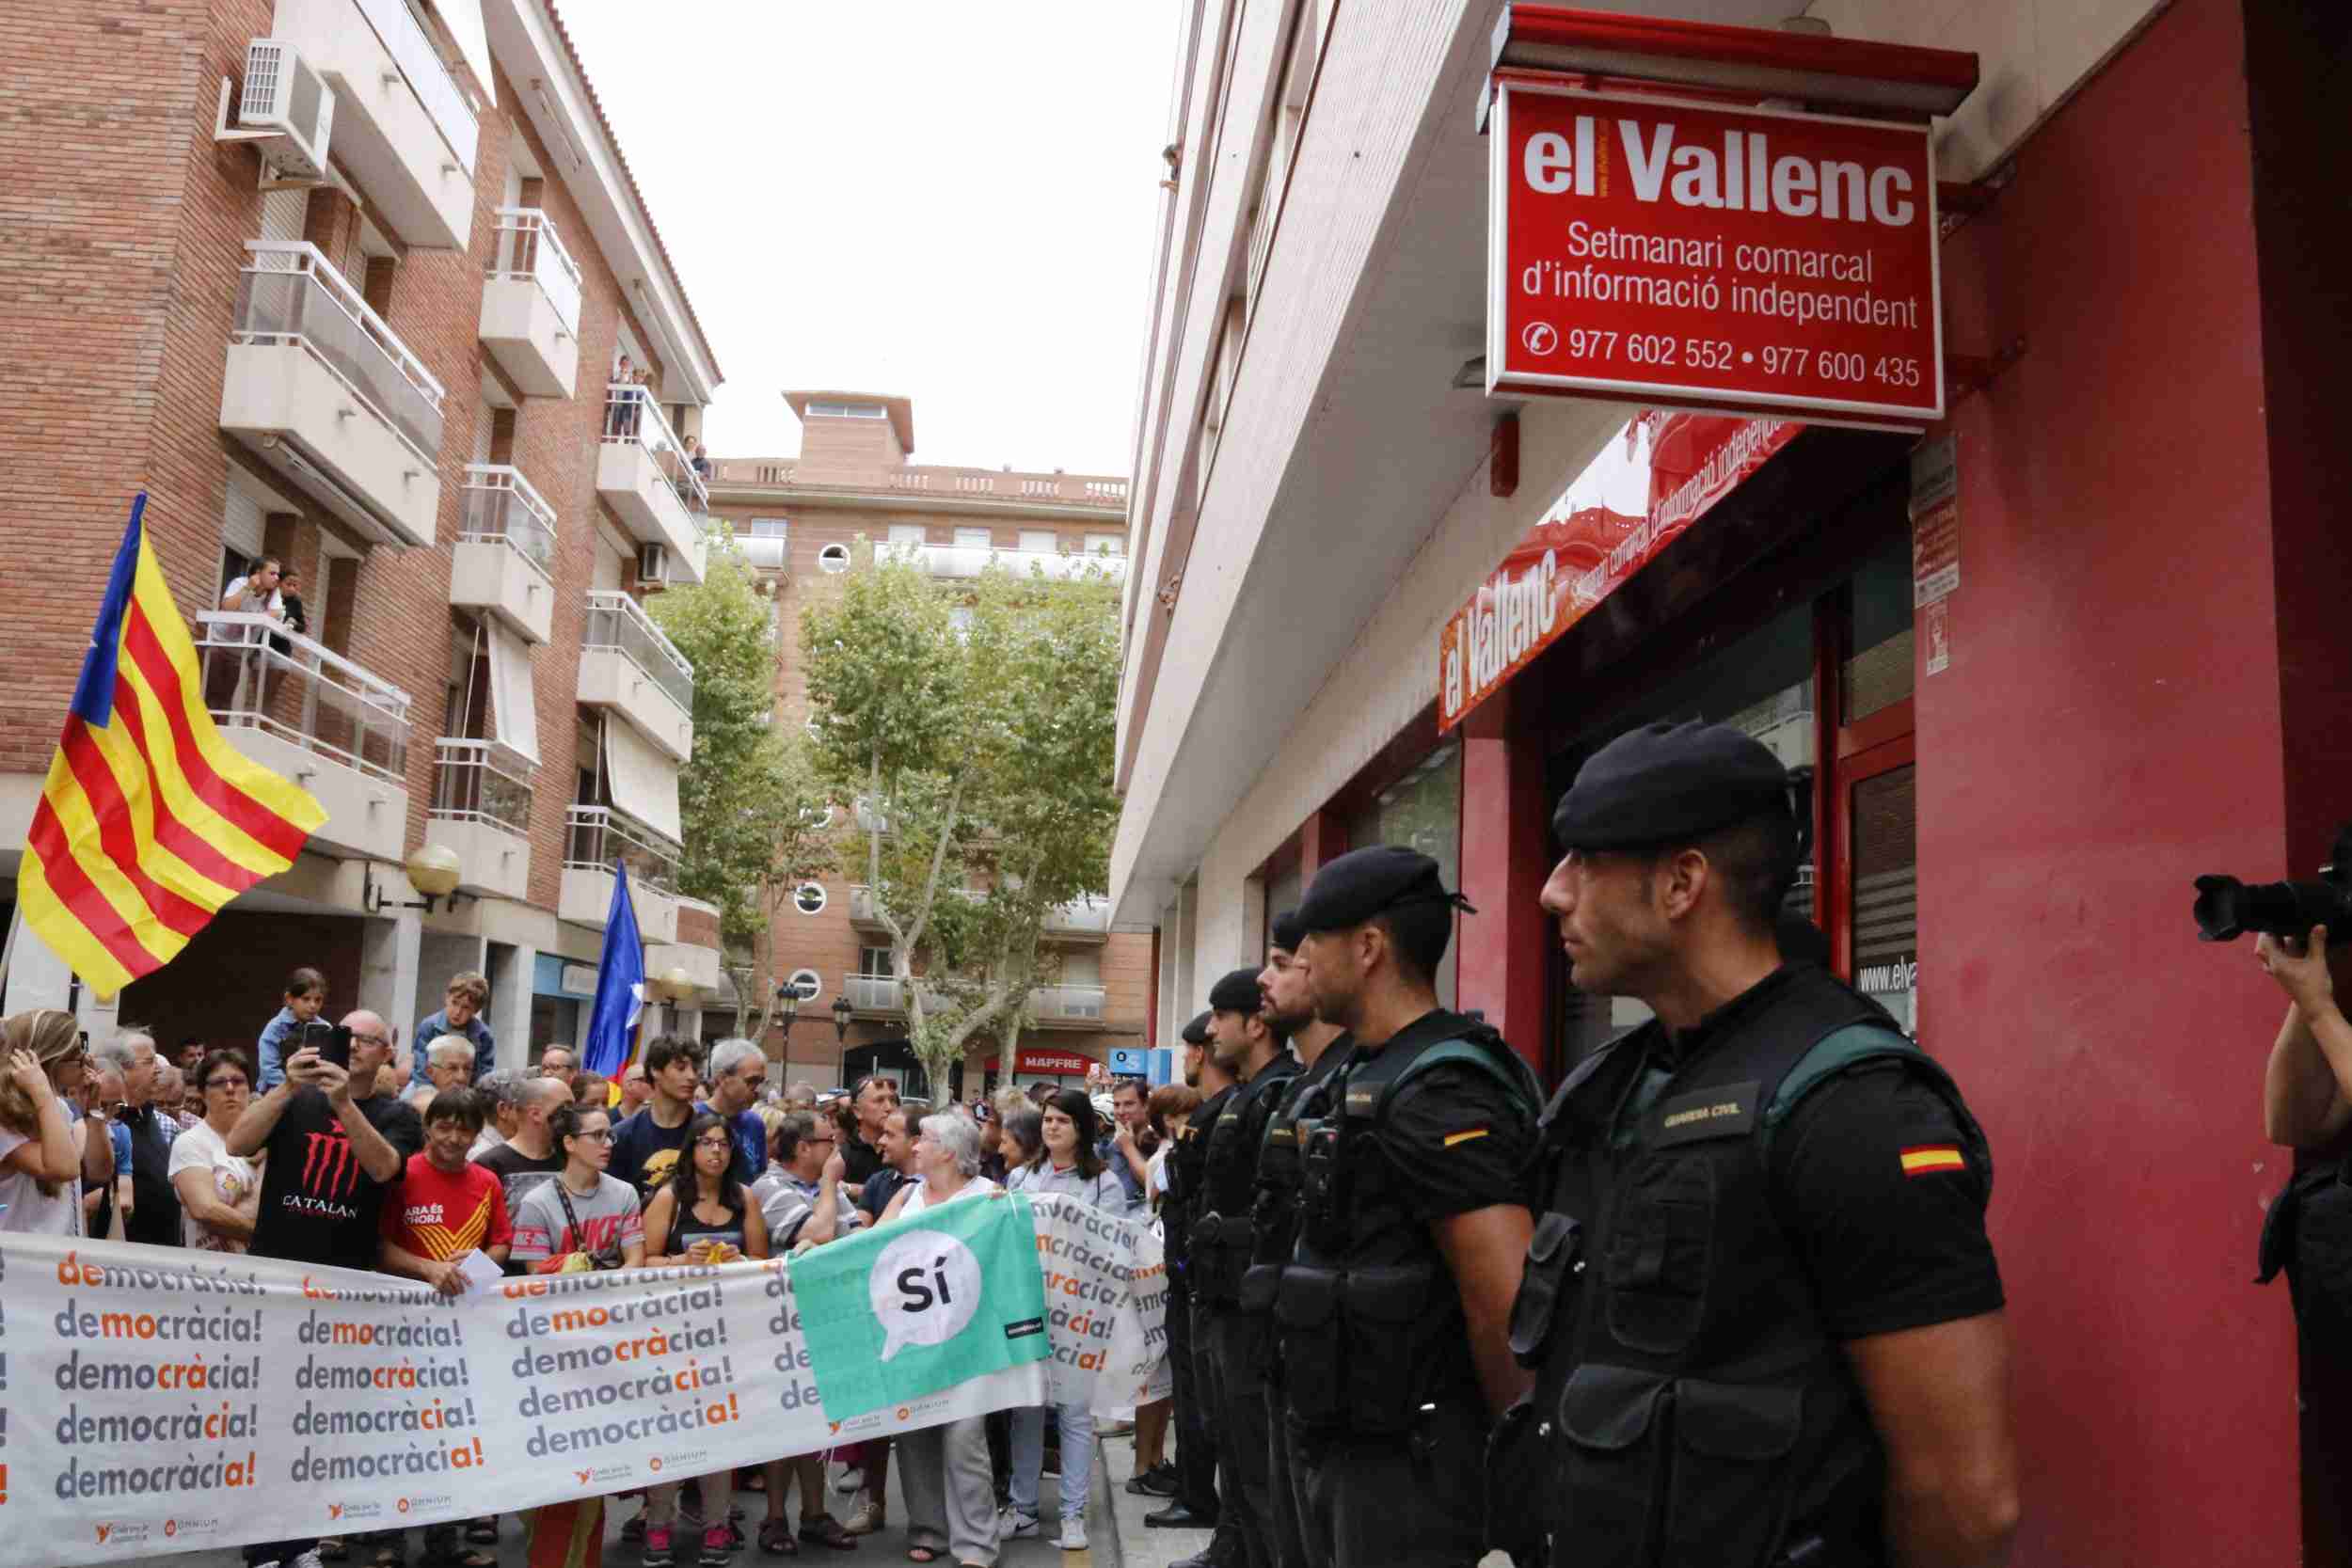 "Where are the voting slips?": social media jokes about the Civil Guard